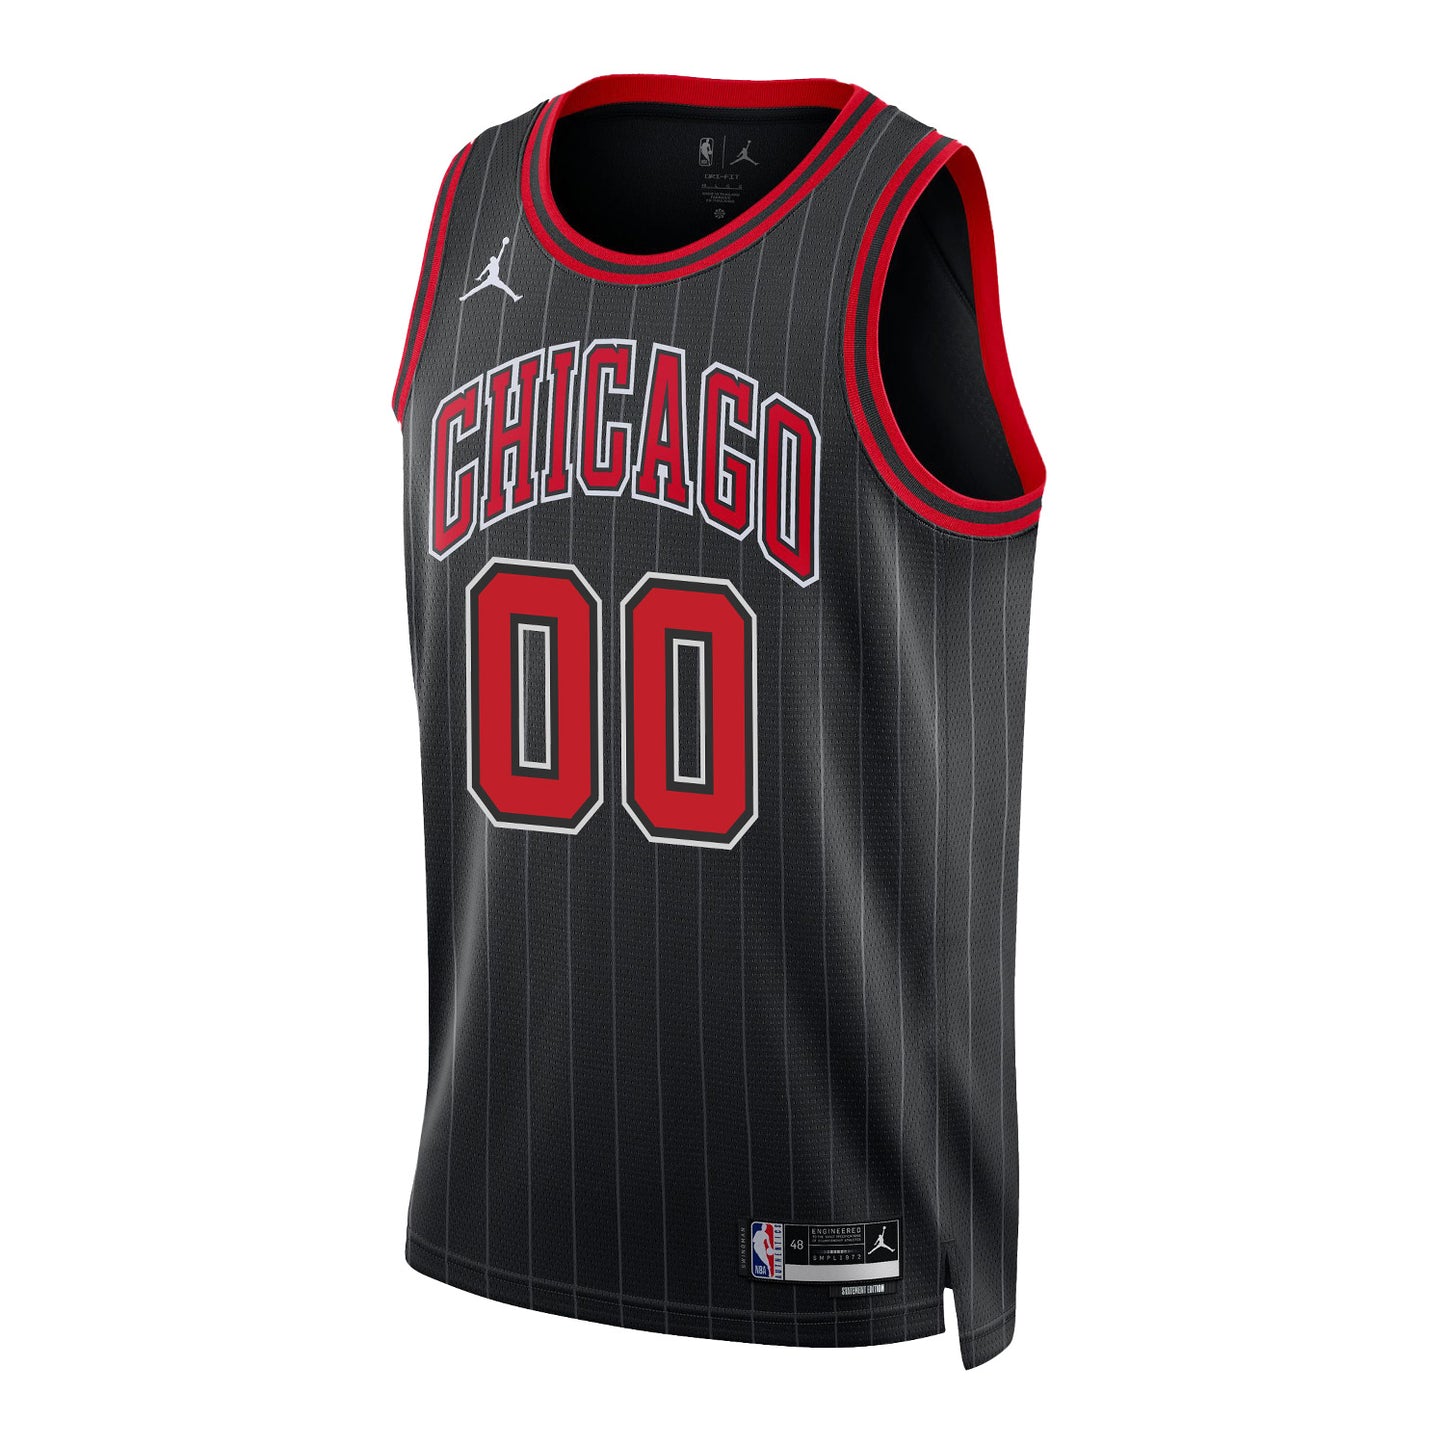 Youth Chicago Bulls Personalized Nike Statement Swingman Jersey in black - front view